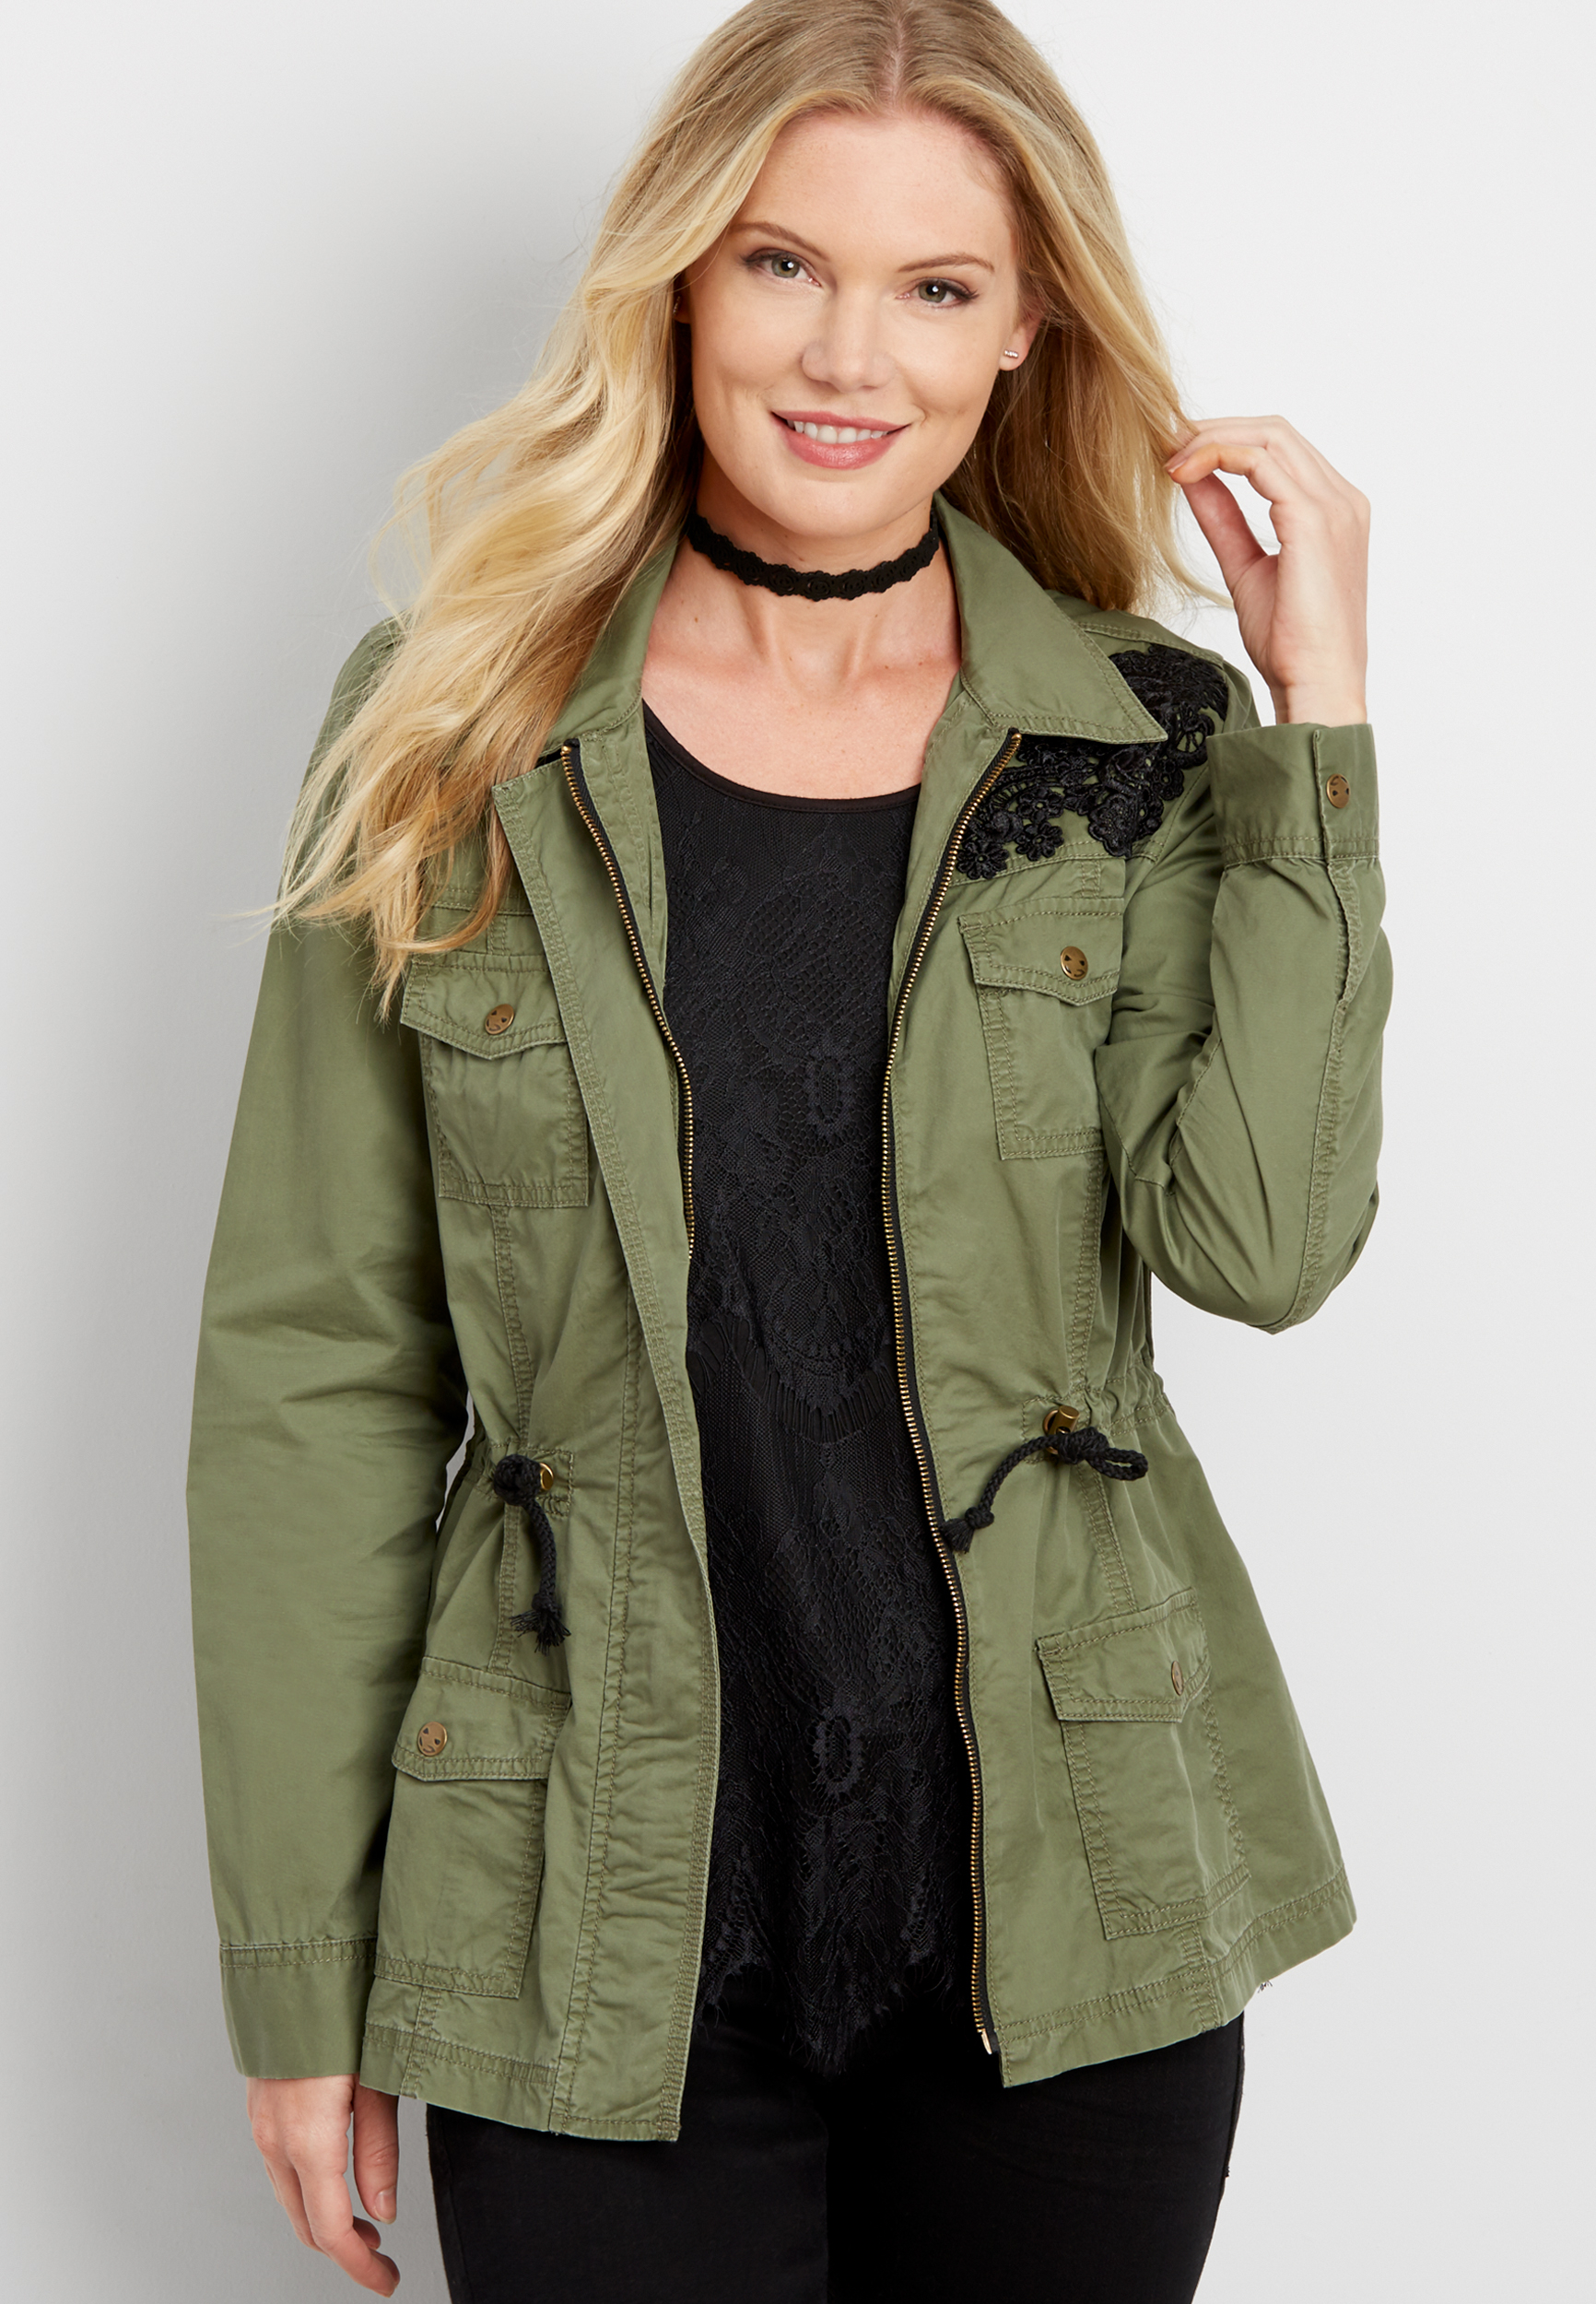 anorak jacket with crocheted overlay | maurices